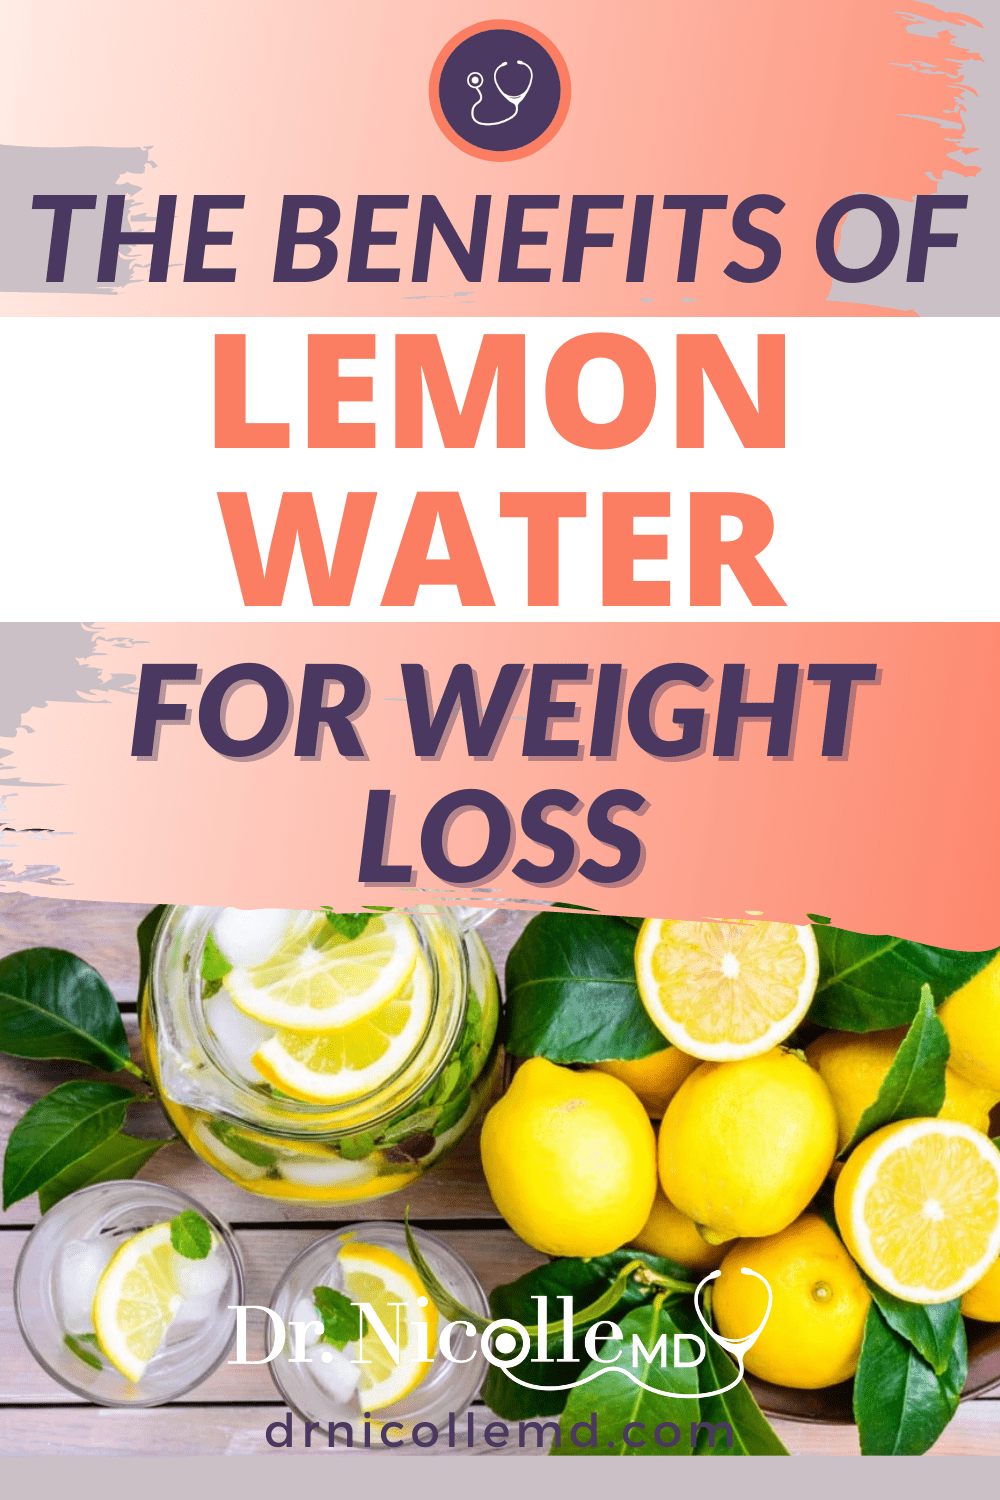 The Benefits of Lemon Water for Weight Loss